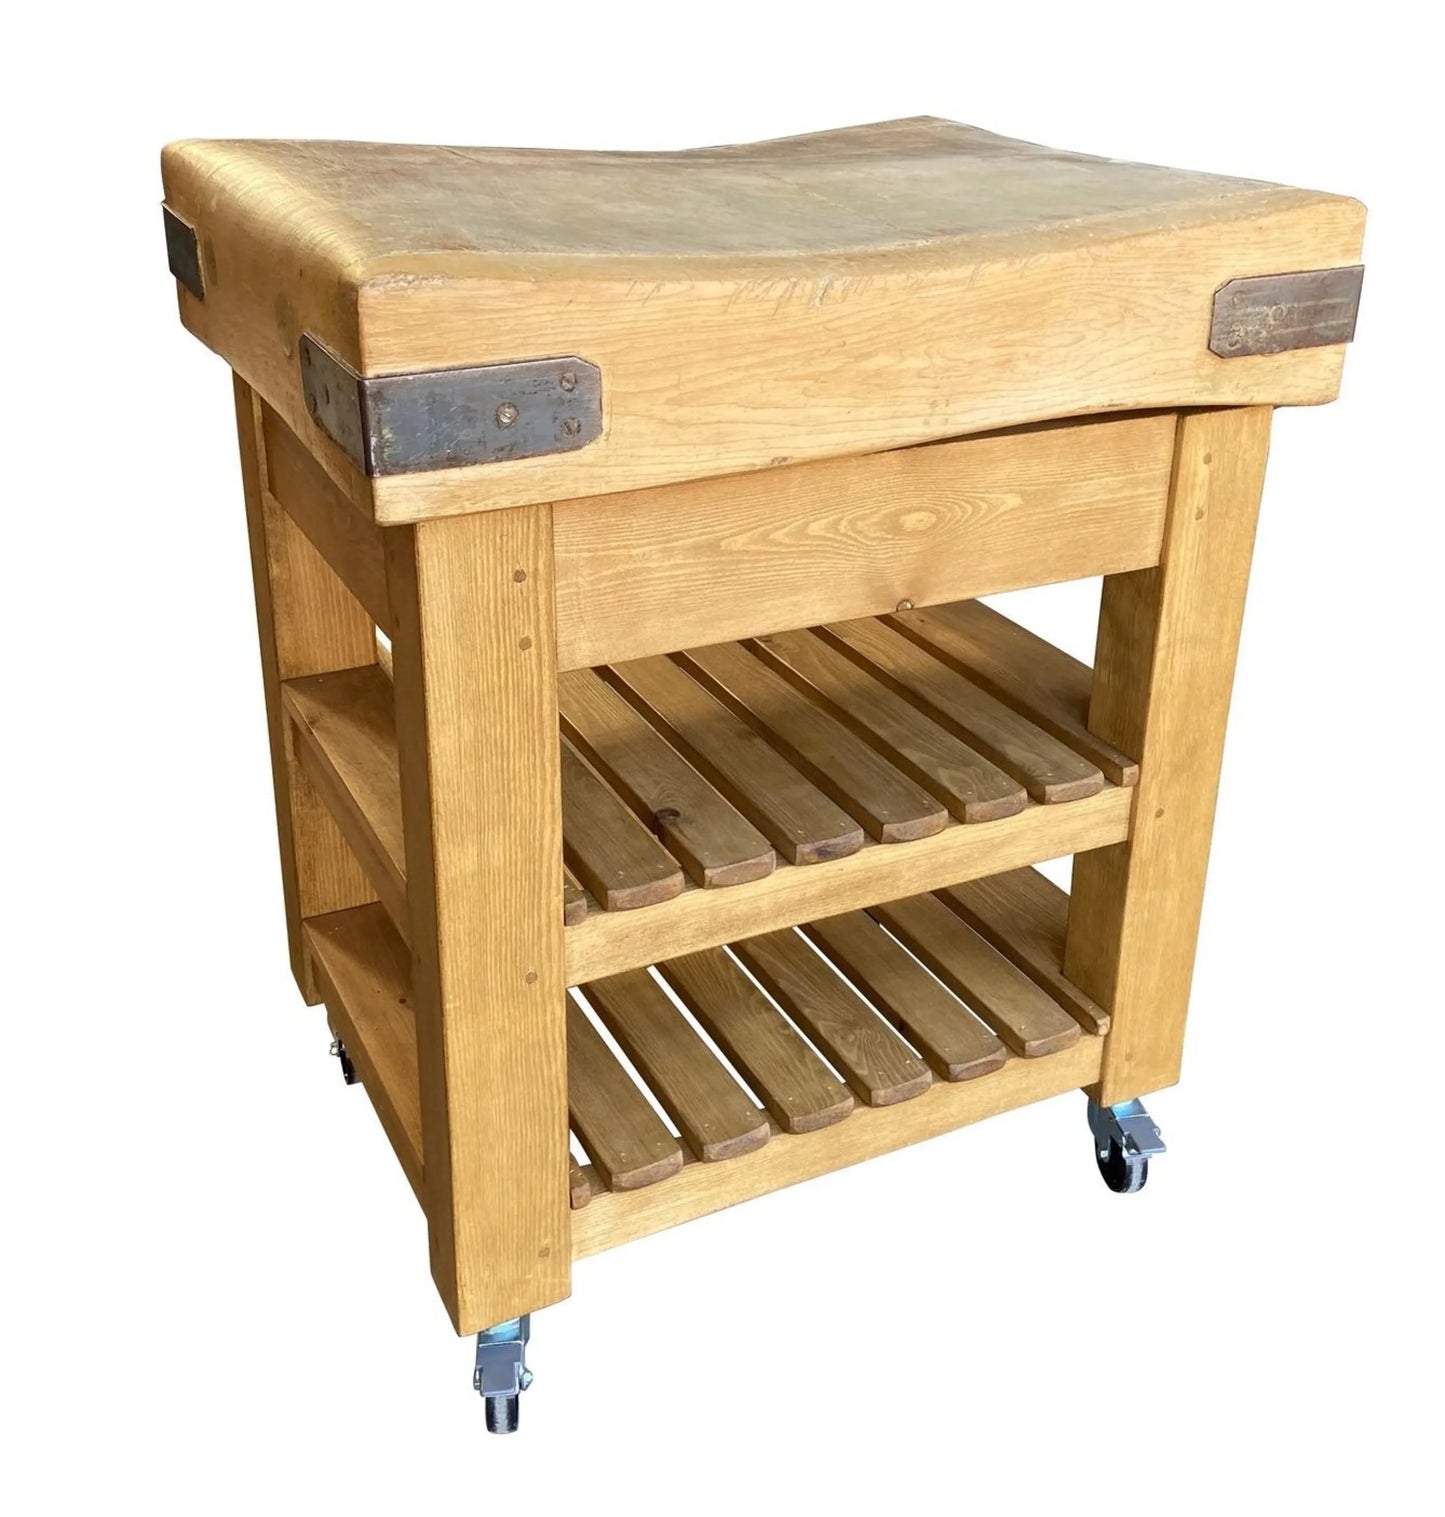 Butchers block, made any style and size with or without base